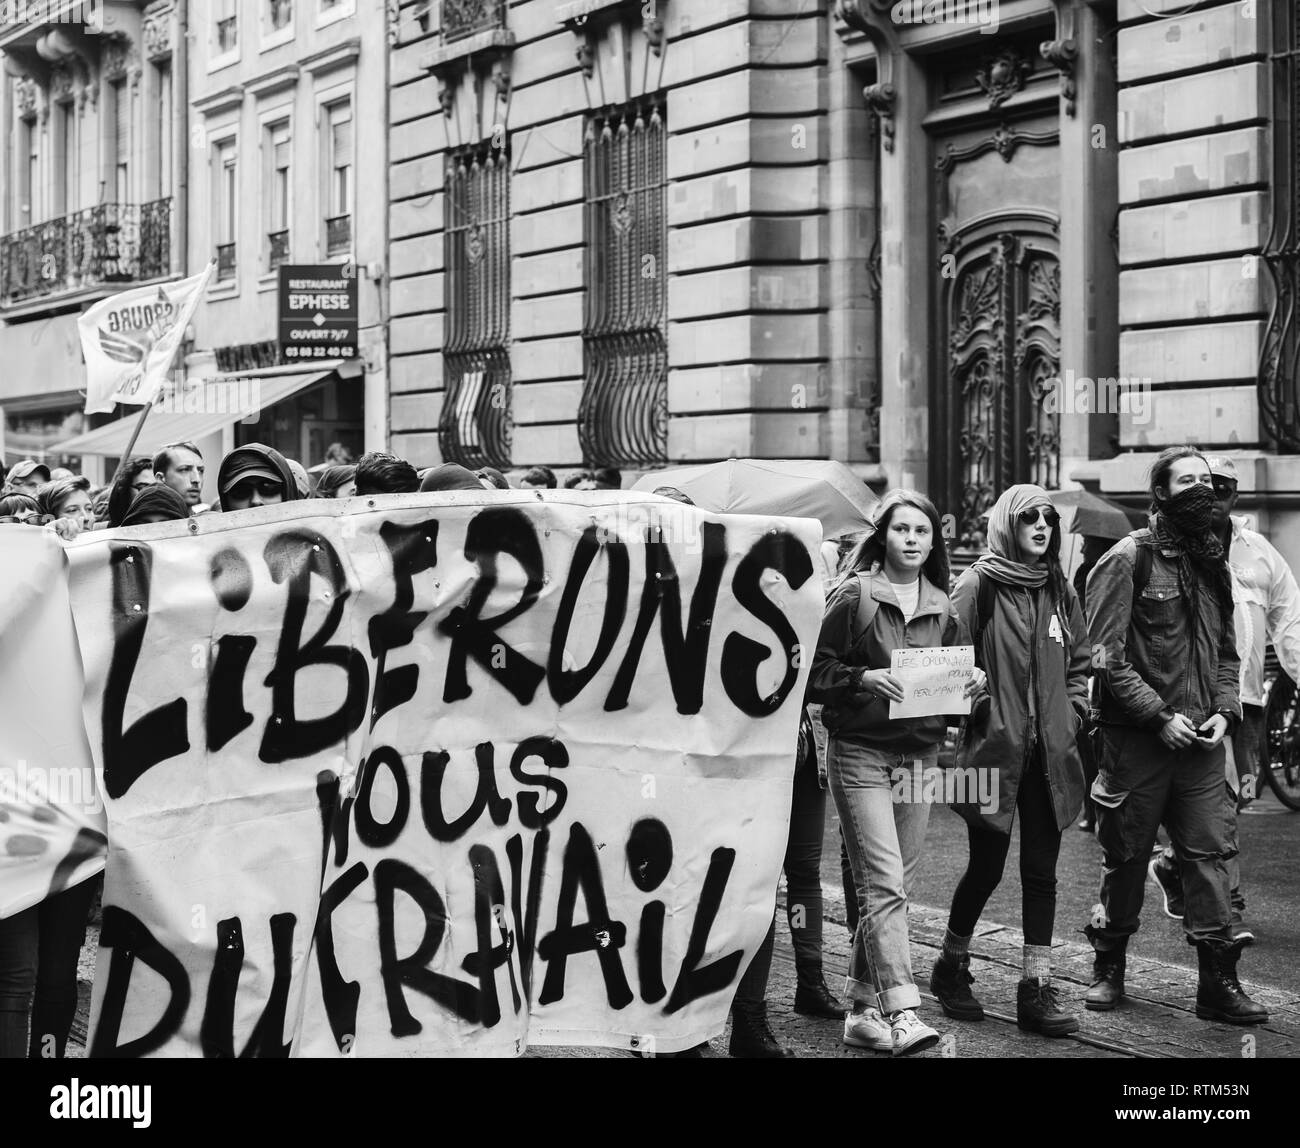 STRASBOURG, FRANCE - SEPT 12, 2017: Masked people with Soyons Revolutionnaires translated as Be Revolutionary poster at French Nationwide day of protest against the labor reform proposed by Emmanuel Macron Government Stock Photo